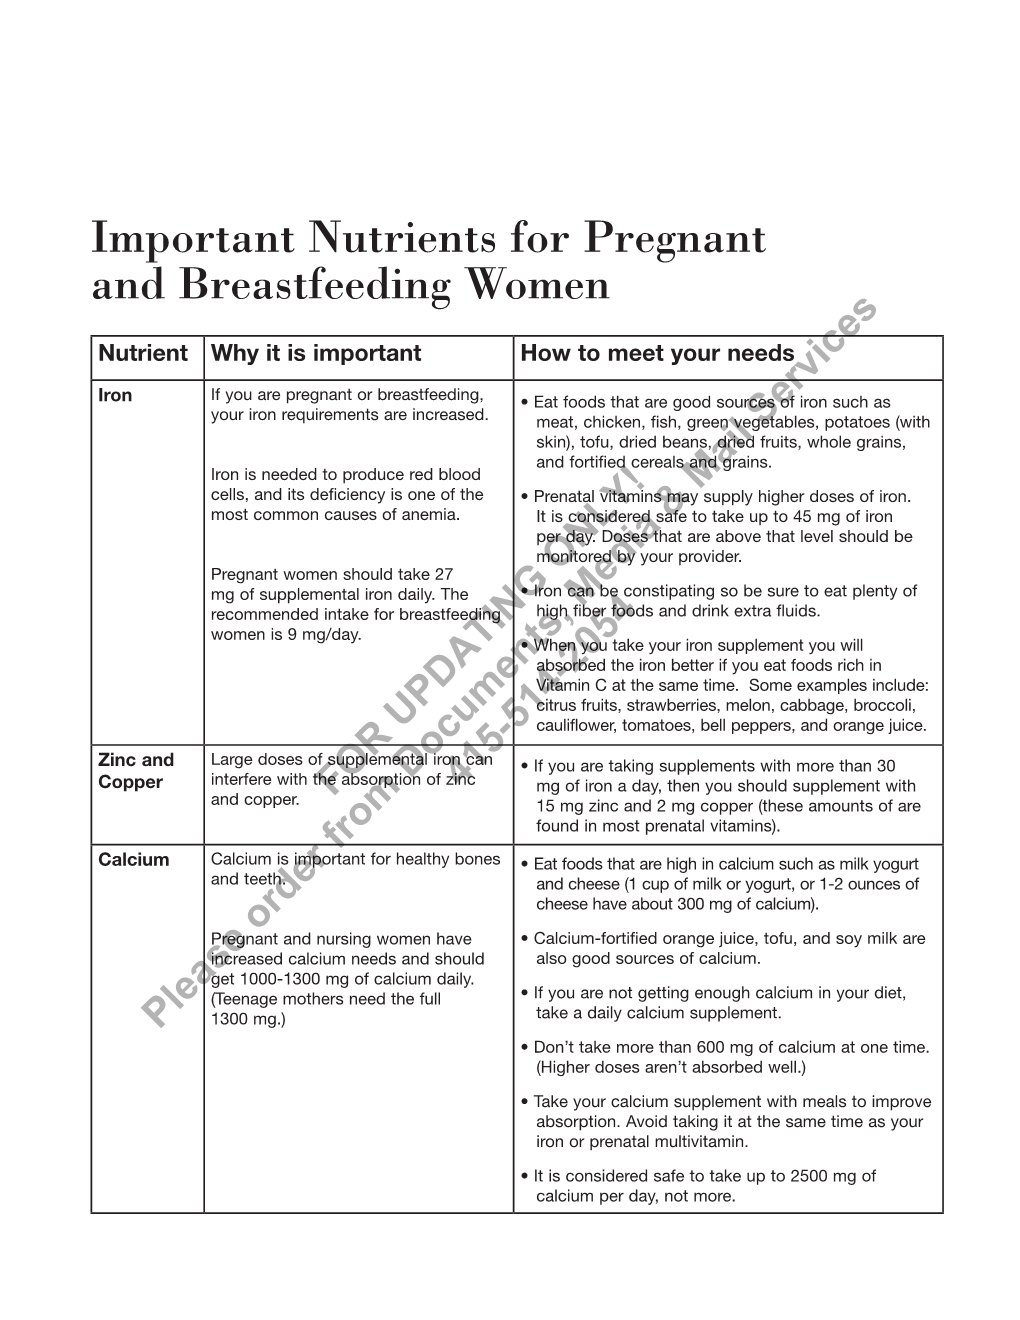 Important Nutrients for Pregnant and Breastfeeding Women